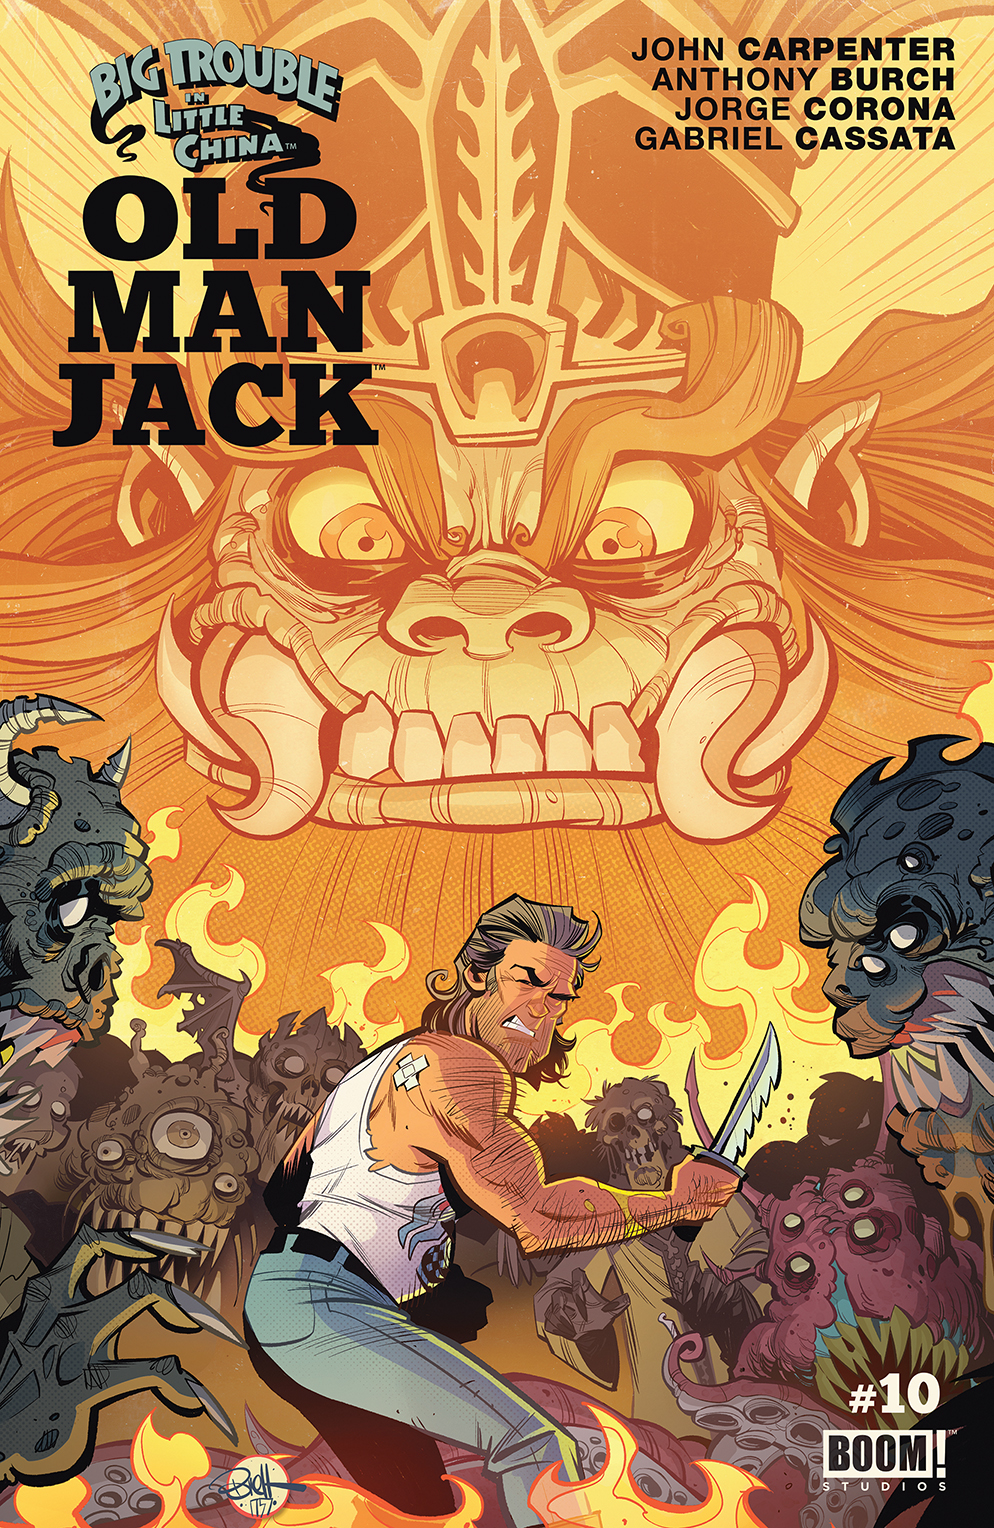 BIG TROUBLE IN LITTLE CHINA OLD MAN JACK #10